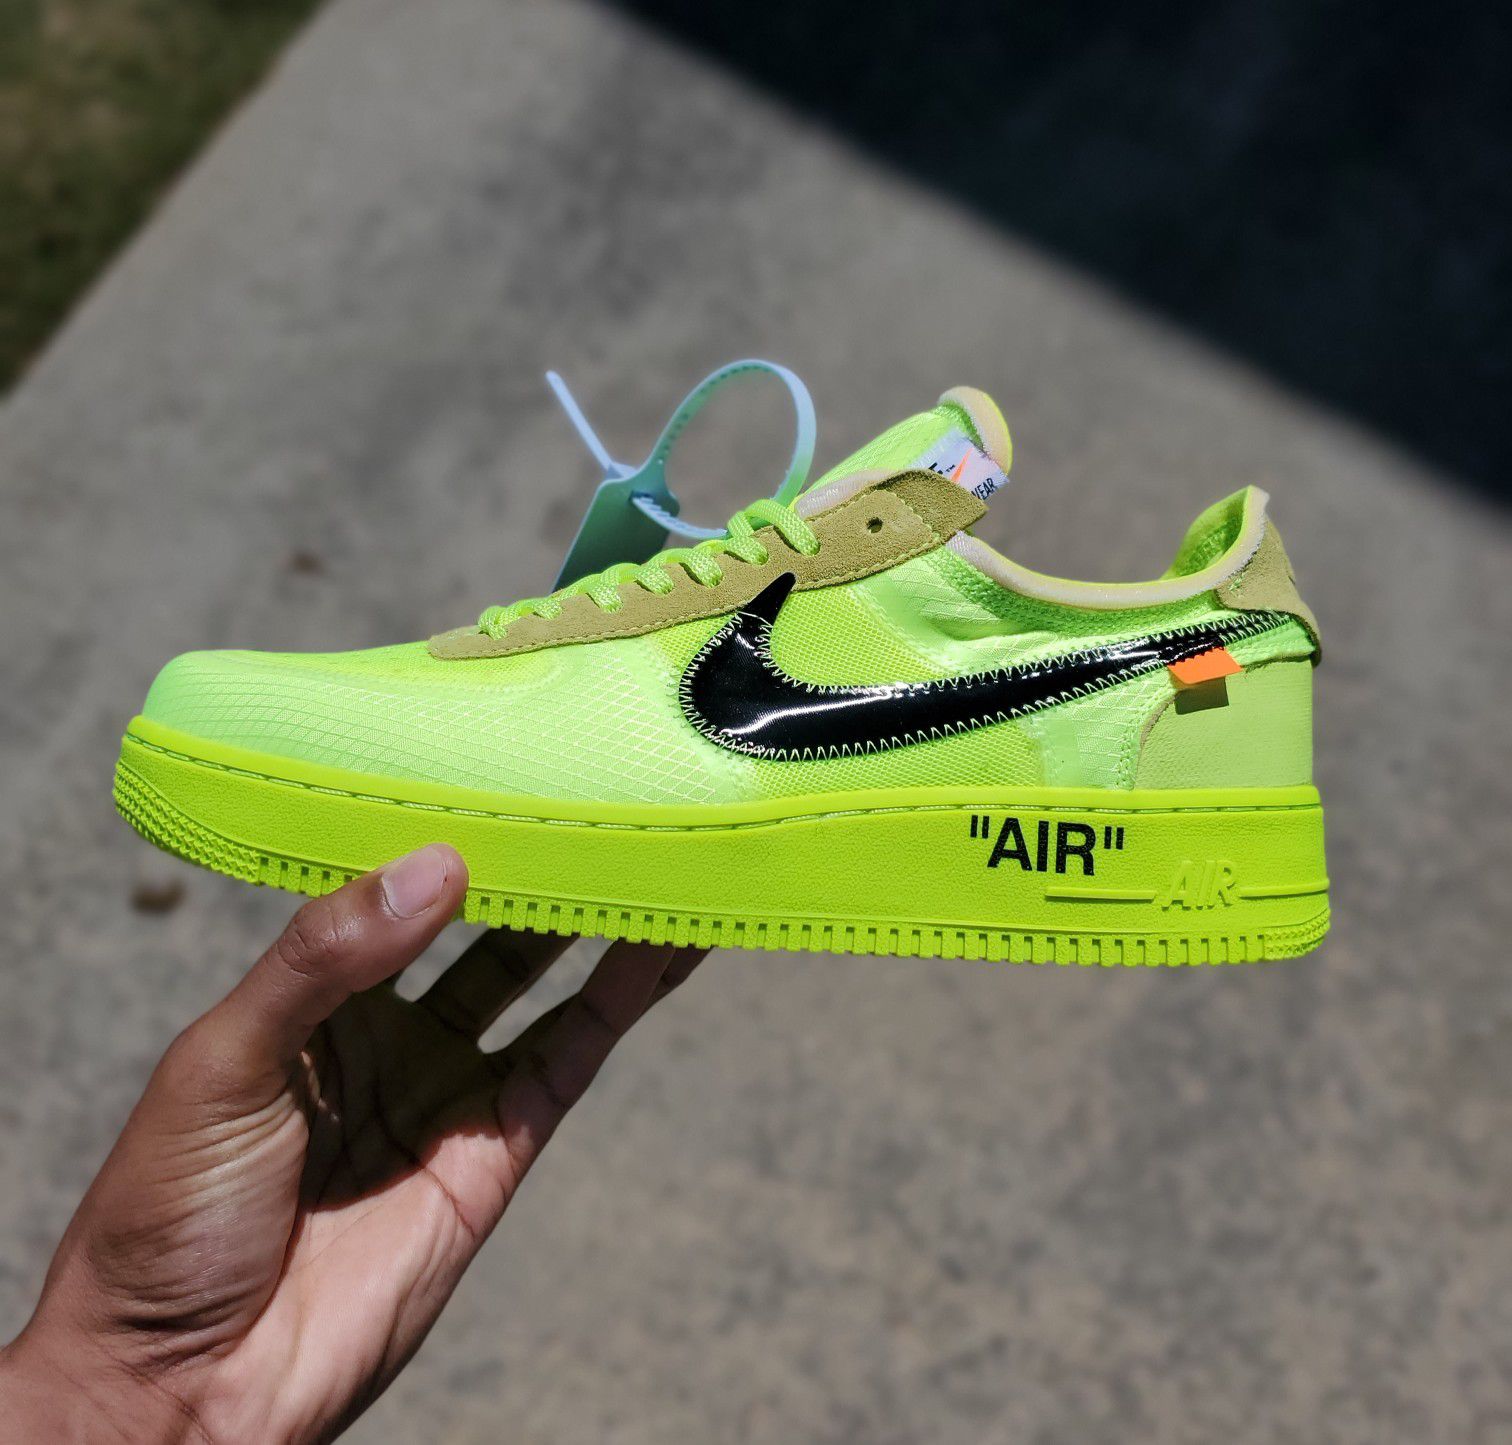 Nike Off-White Air Force 1 in Volt